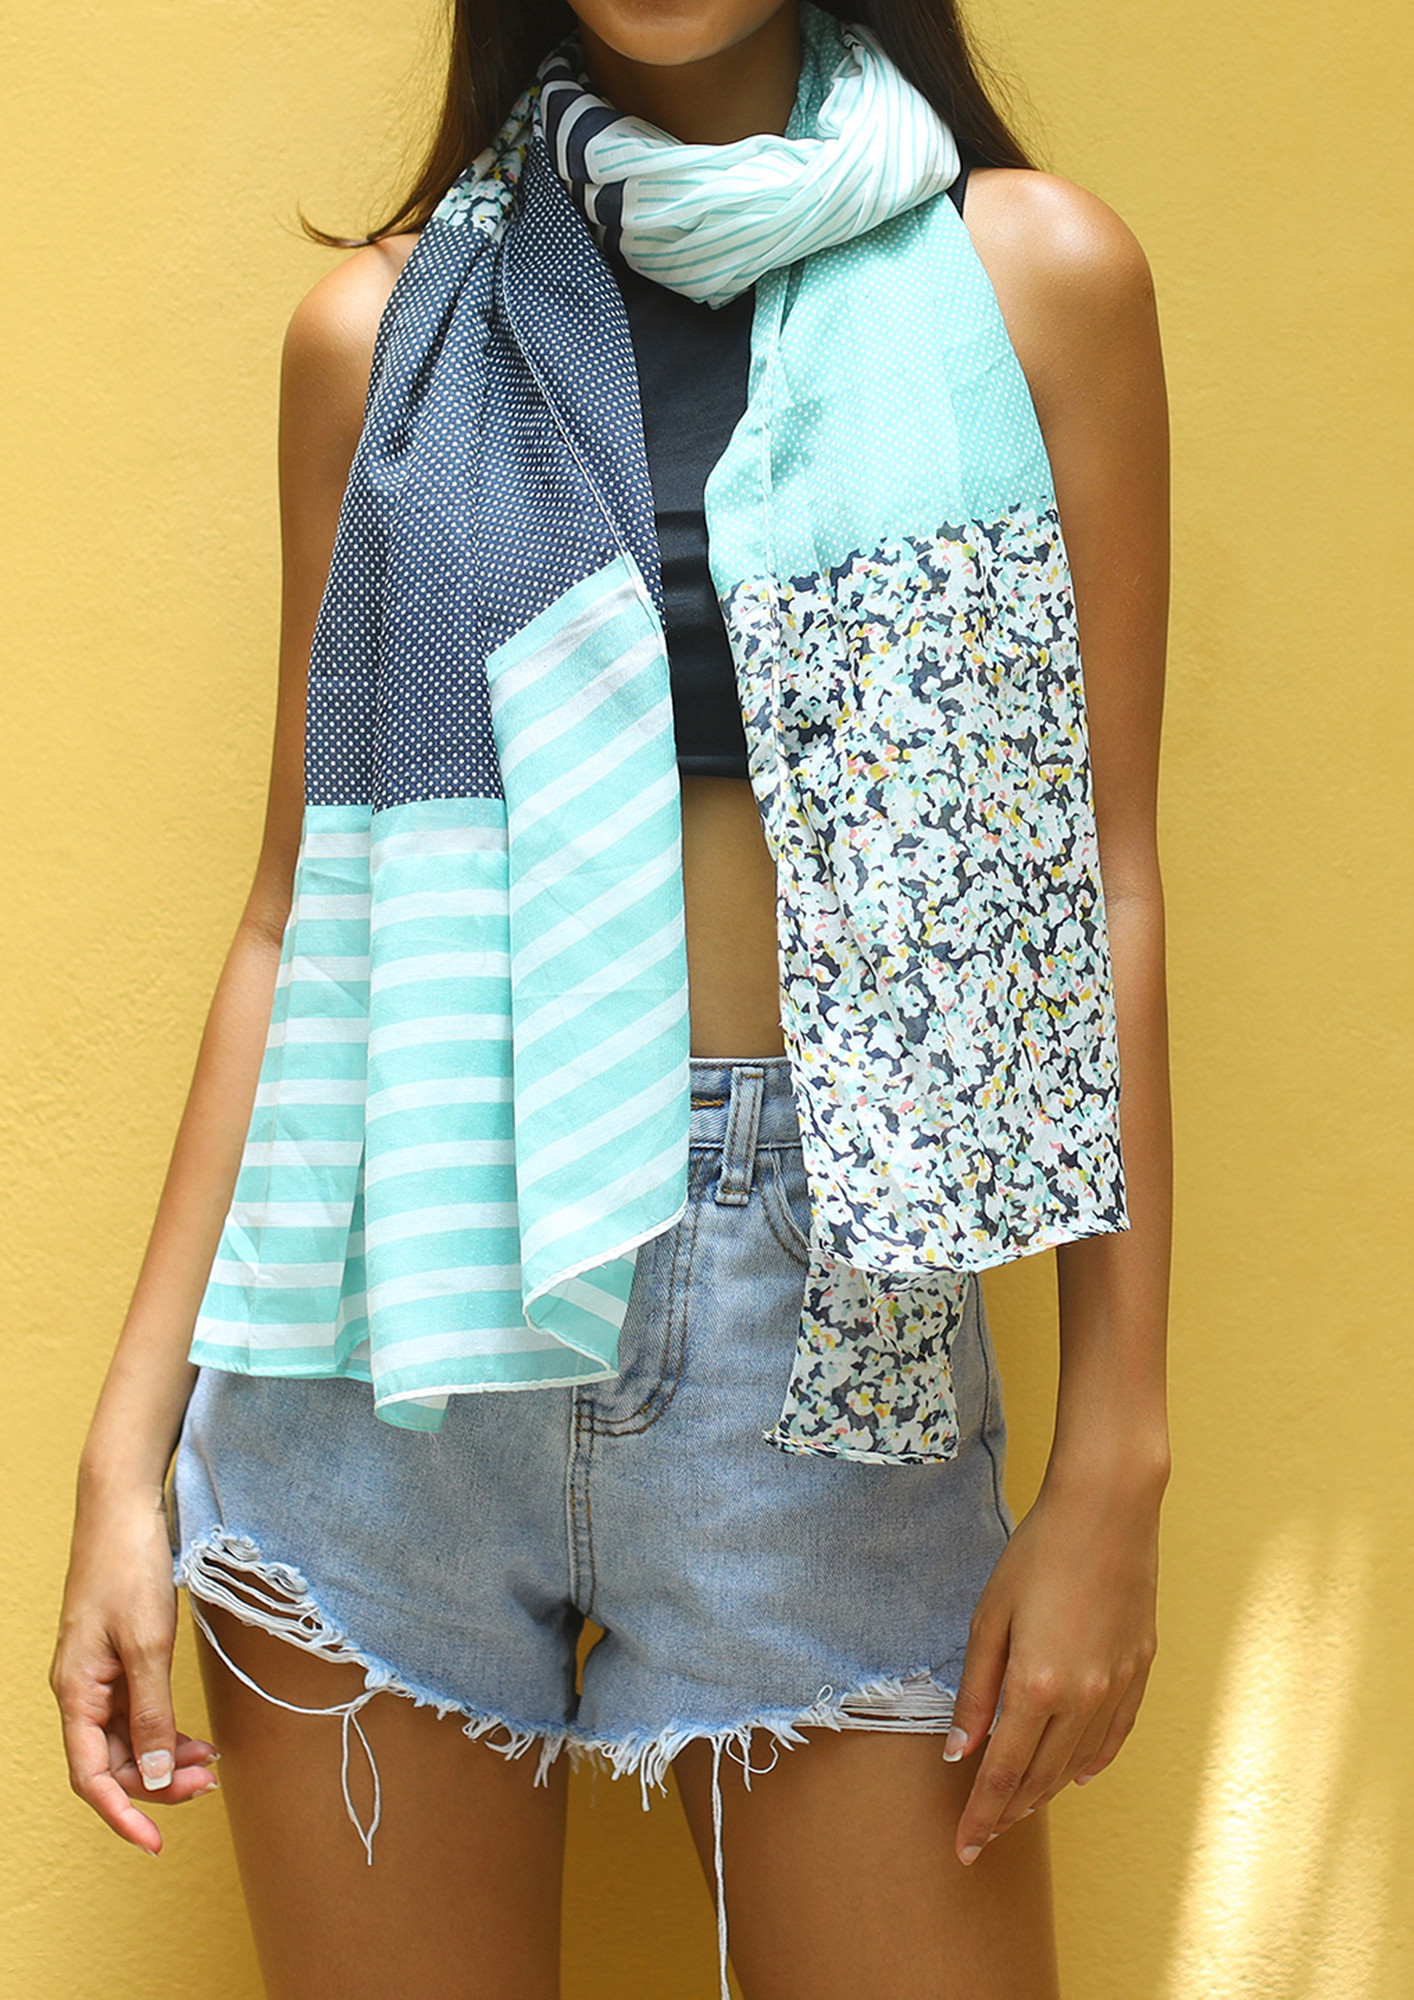 Abstract, Floral & Stripes Printed Blue, Teal & White Poly-Cotton Scarf